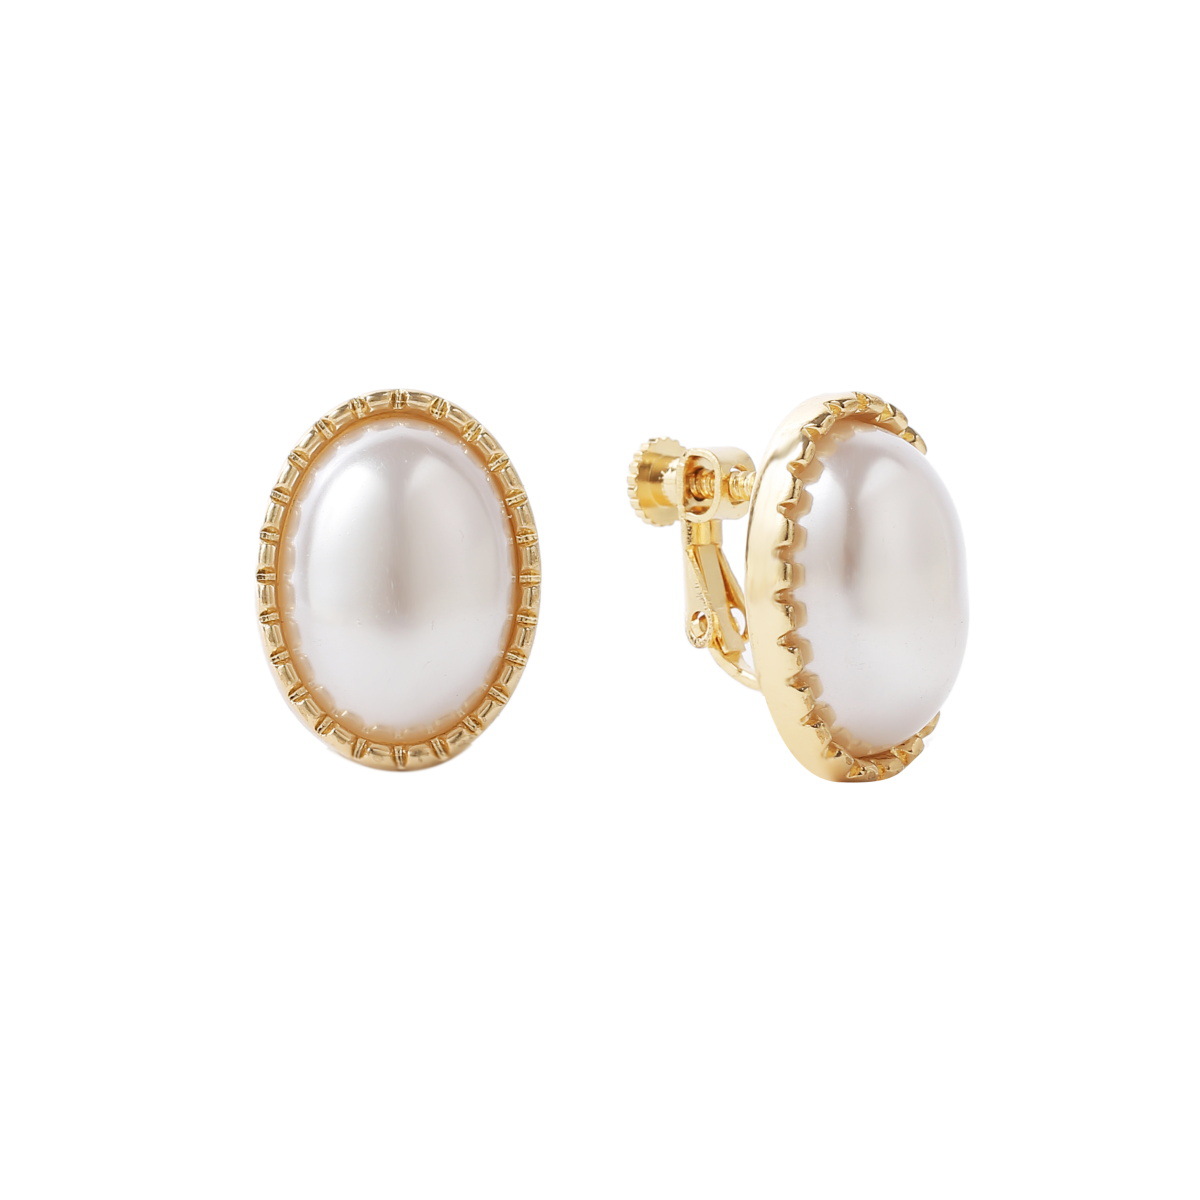 Fashion Round Alloy Geometric Round Pearl Stud Earrings